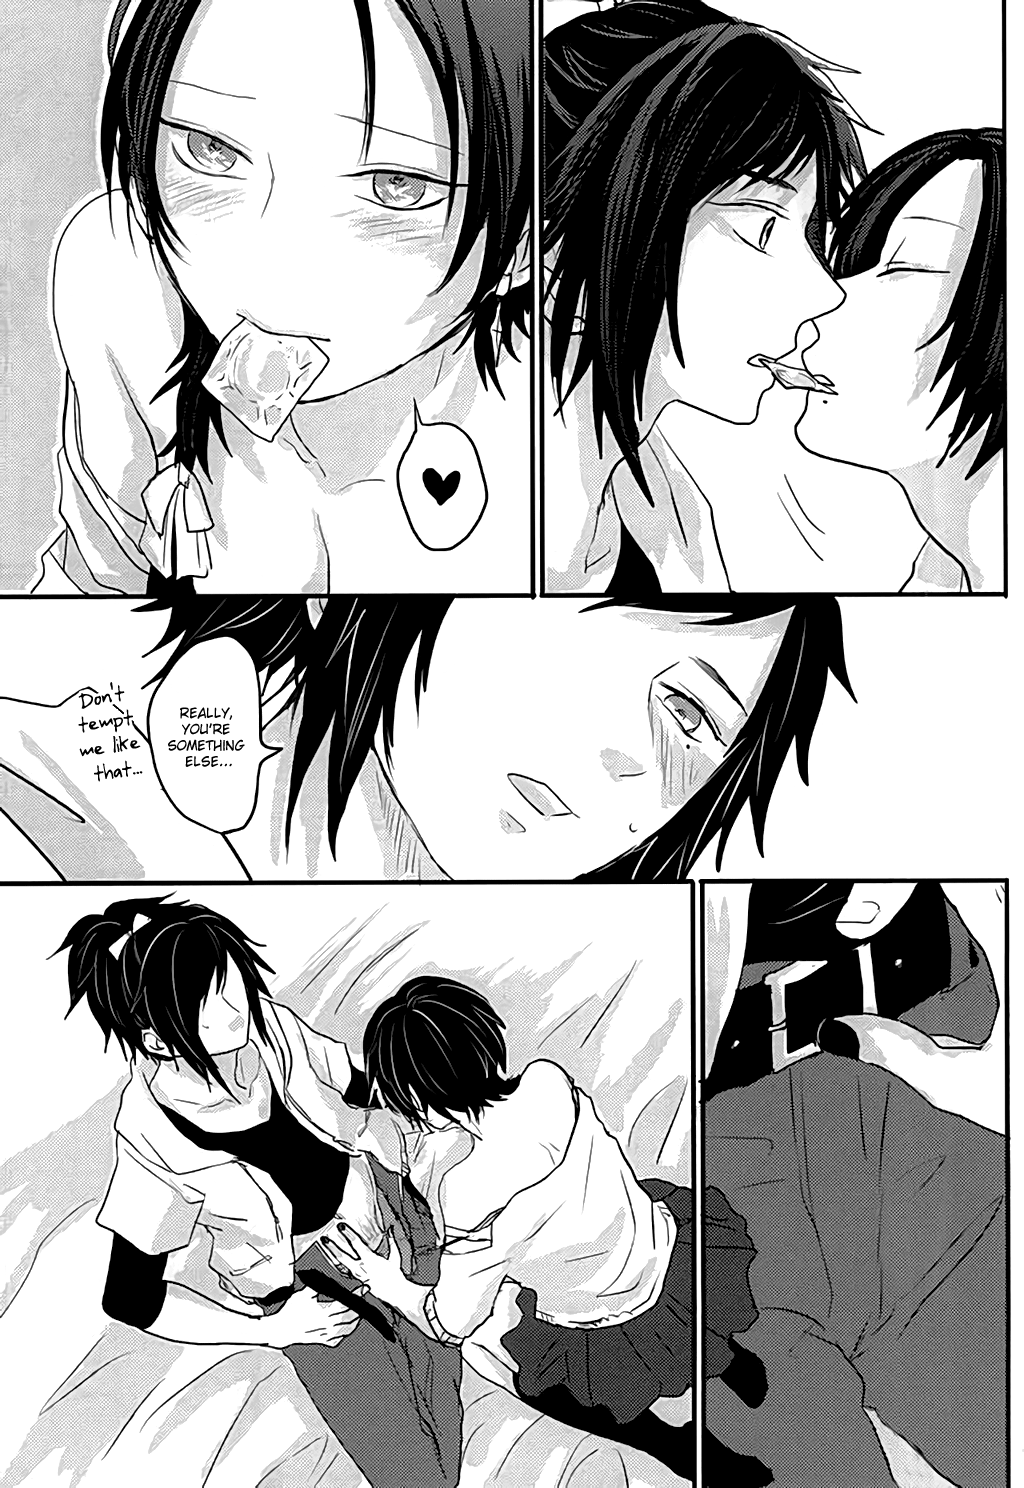 (SPARK10) [glowfly (JULLY)] After the strawberry (Touken Ranbu) [English] [Momoiro] (SPARK10) [glowfly (JULLY)] After the strawberry (刀剣乱舞) [英訳]